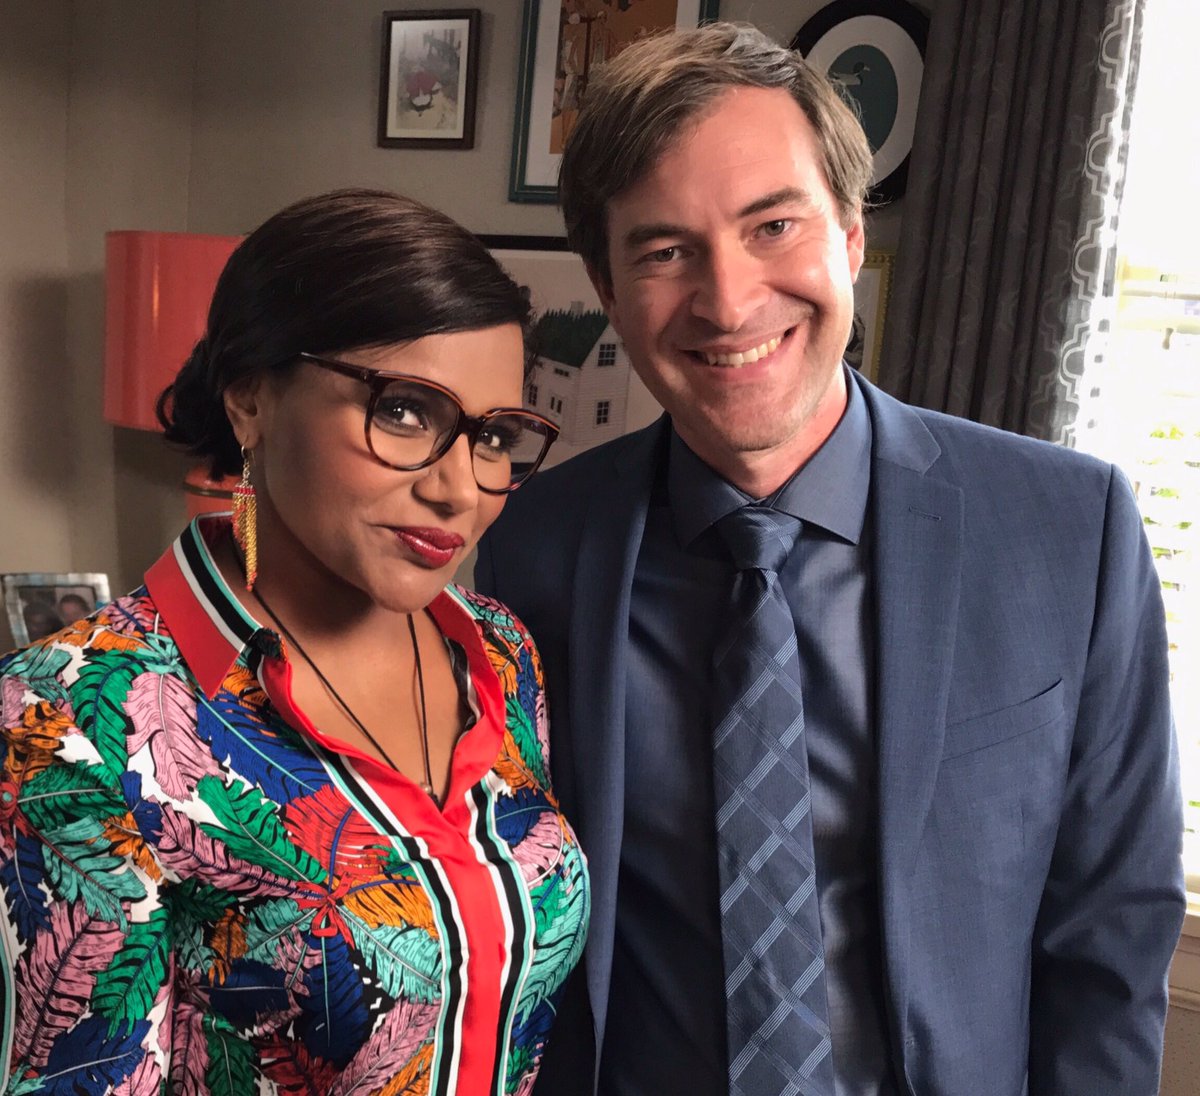 One more time with everyone's favorite midwife, Brendan Deslauriers. #TheMindyProject https://t.co/gGPhJjJ04C